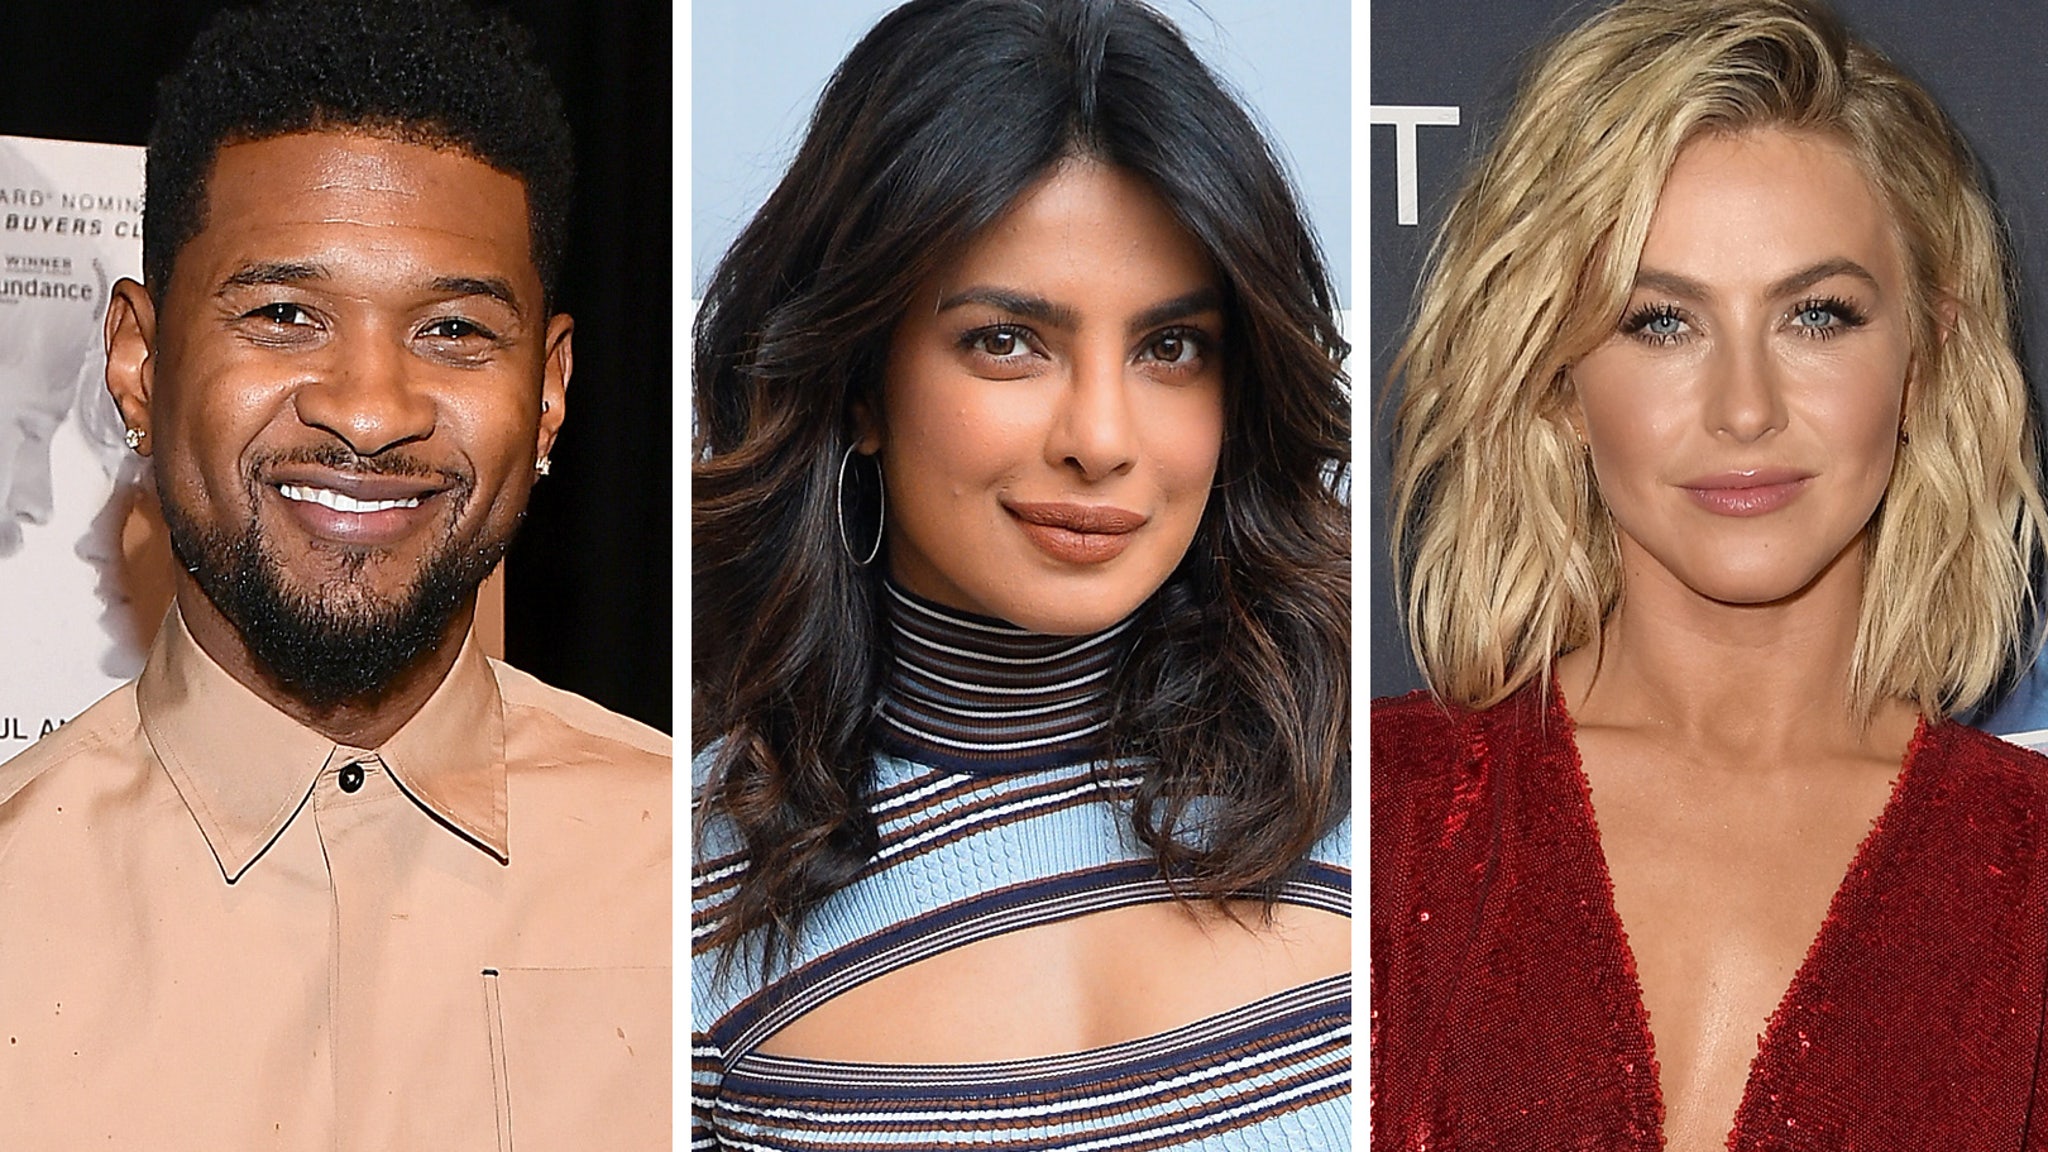 Why Usher, Priyanka Chopra, and Julianne Hough's reality series The Activist is being dragged onto Twitter - Truth Daily